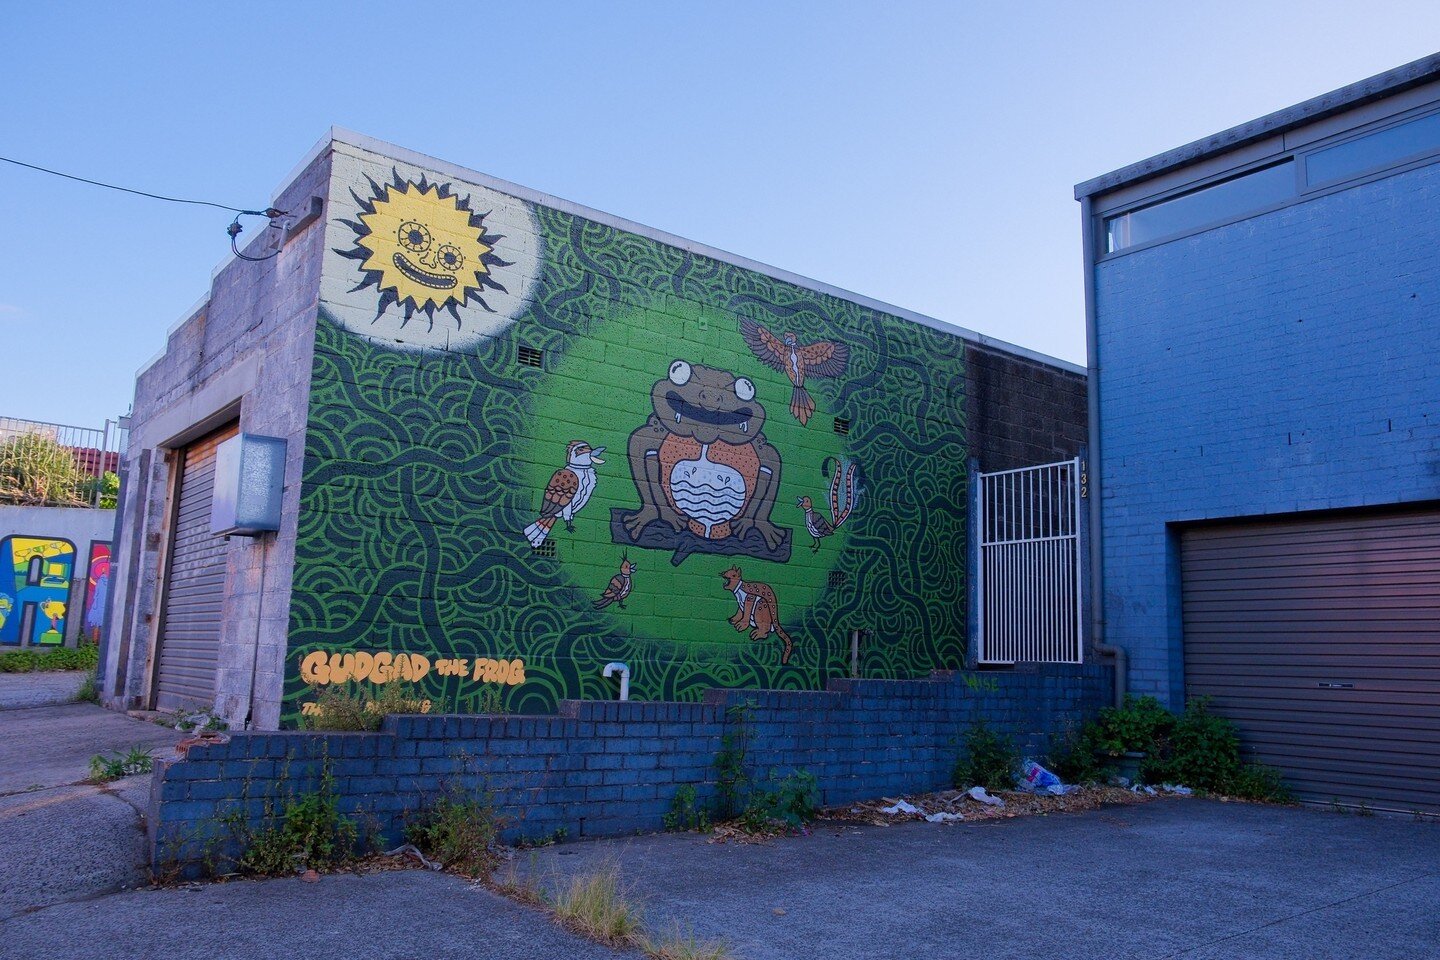 SITE 4 (Military Lne): Local legend @thornepainting painted his debut #Wonderwalls mural in the lanes of Port Kembla depicting the story of Gudgad The Frog.⁠
⁠
---⁠
Wonderwalls Festival is made possible by the support of @ourregionalnsw @mtnaustralia